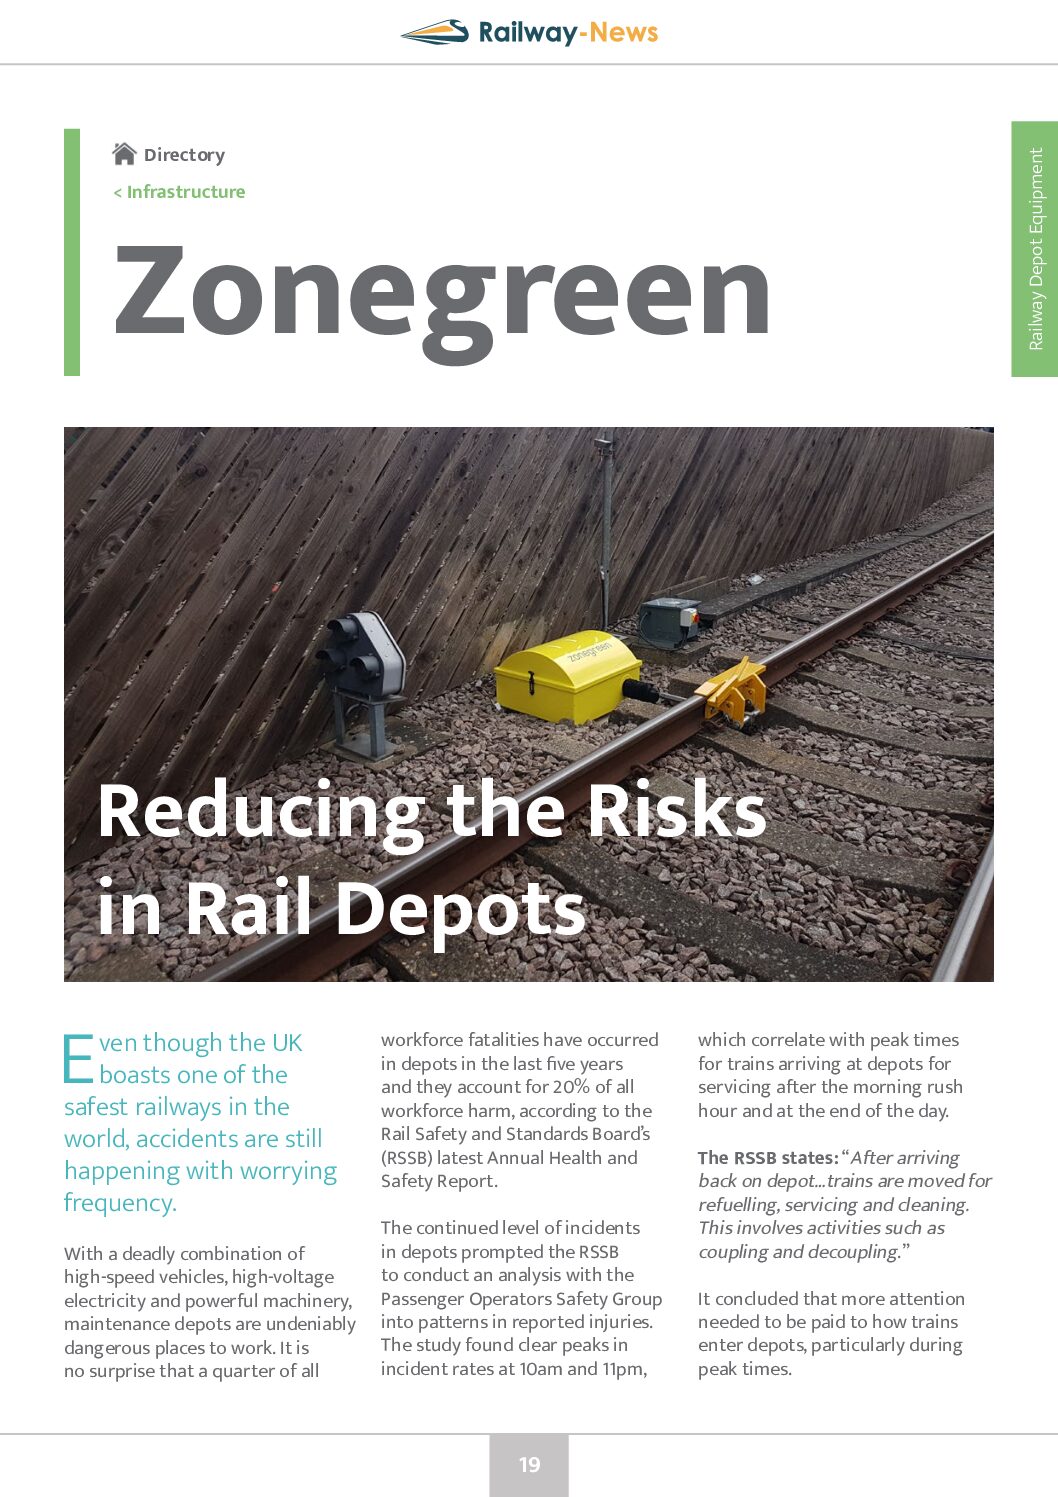 Reducing the Risks in Rail Depots